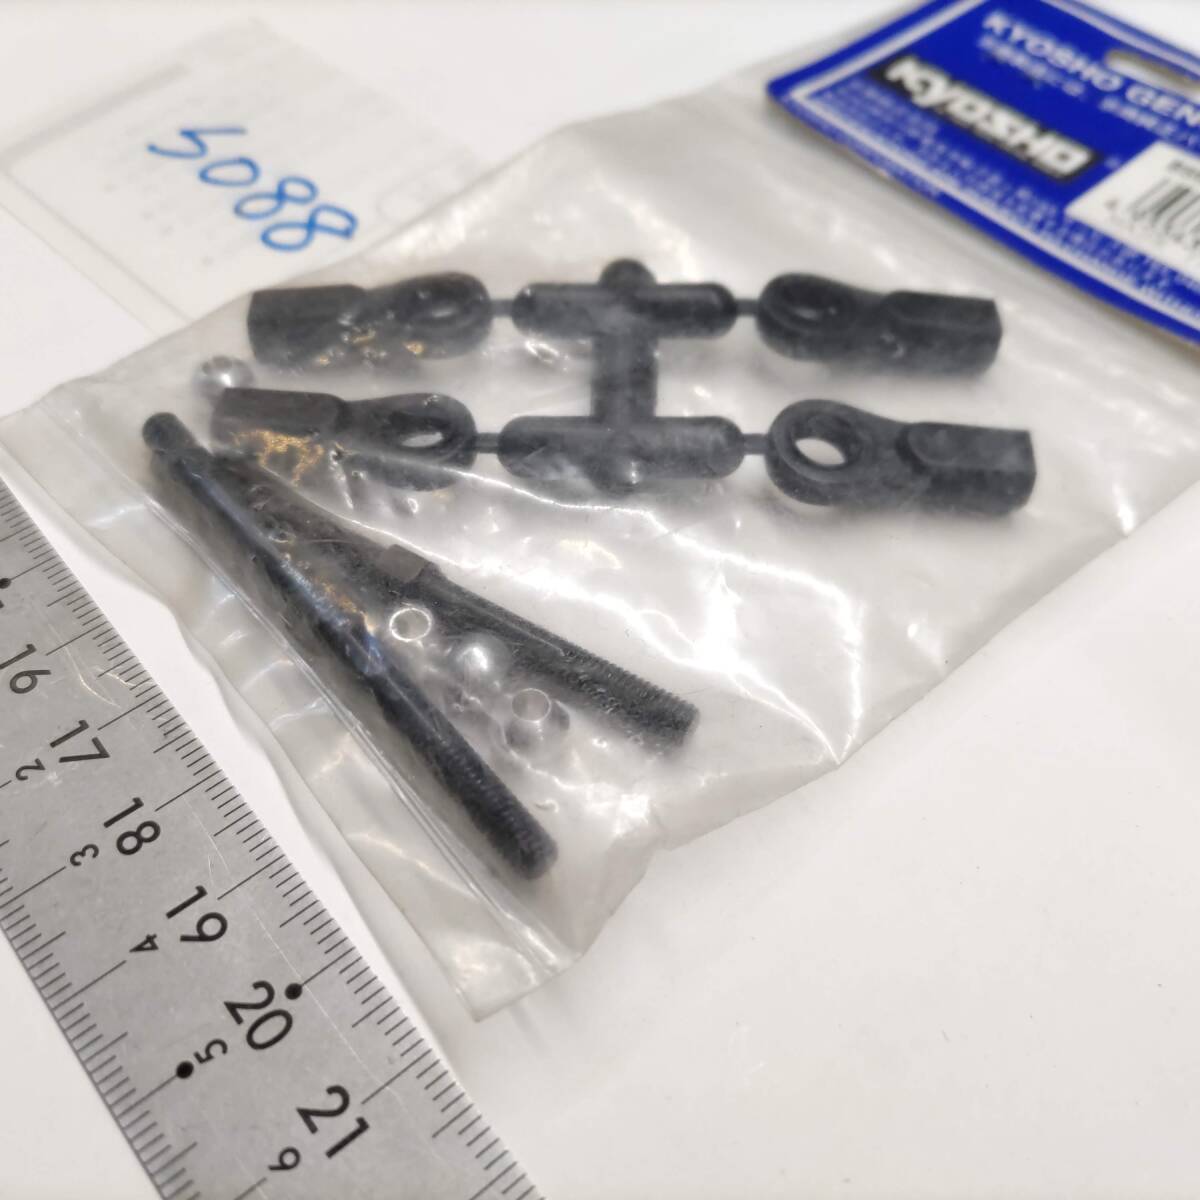 S088　KYOSHO 京商　BSW35 タイロッドSP　Special tie rod　未開封 長期保管品_画像6